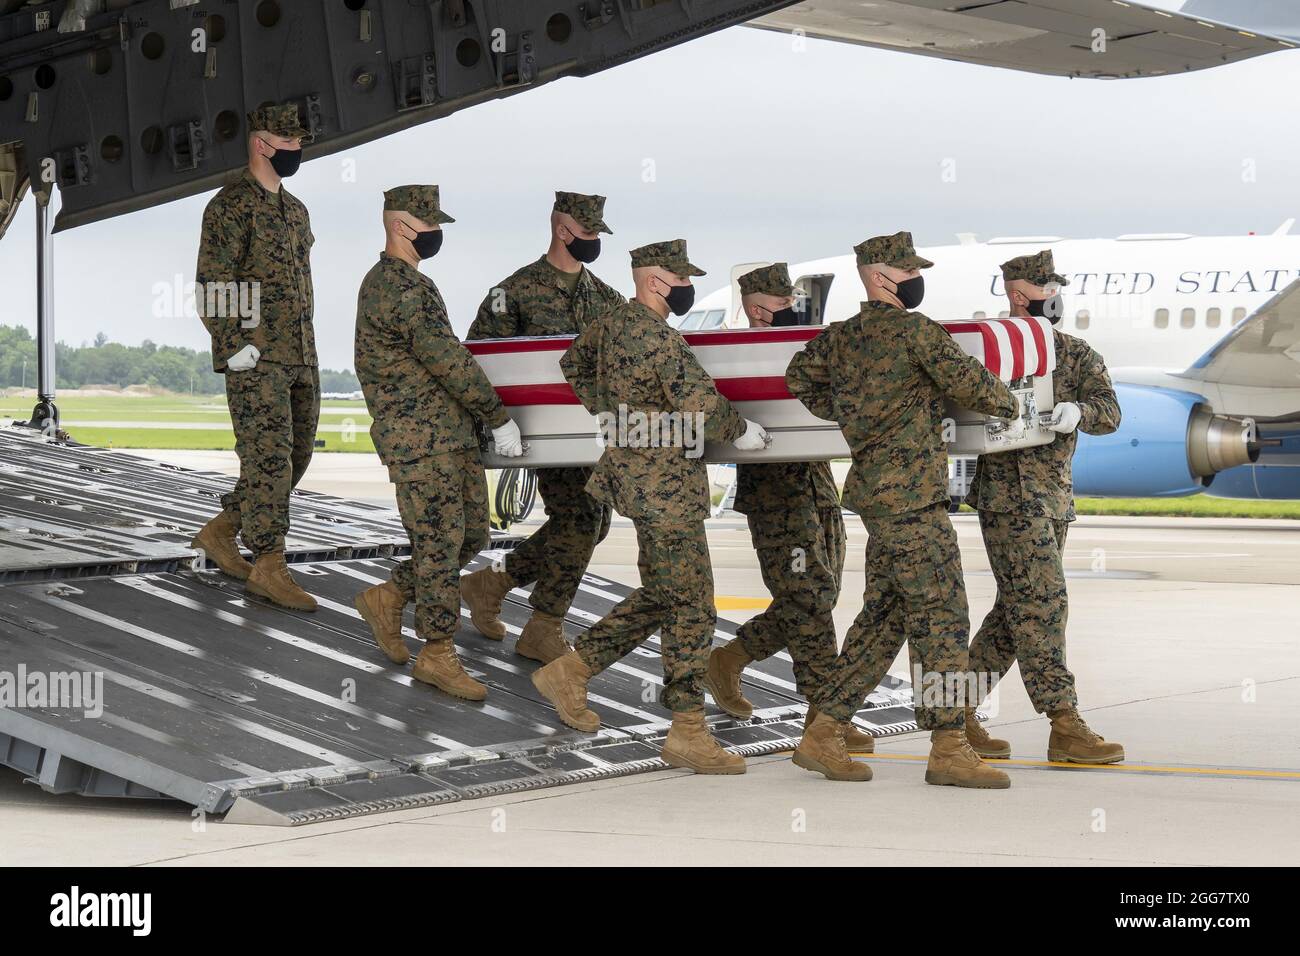 A U.S. Marine Corps carry team transfers the remains of Marine Corps Staff Sgt. Darin T. Hoover of Salt Lake, Utah, on August 29, 2021, at Dover Air Force Base, Delaware. Hoover, who was killed in a suicide bombing outside the Kabul airport on Thursday, August 26, was assigned to 2nd Battalion, 1st Marine Regiment, 1st Marine Division, I Marine Expeditionary Force, Camp Pendleton, California. Photo by Jason Minto/U.S. Air Force/UPI Credit: UPI/Alamy Live News Stock Photo